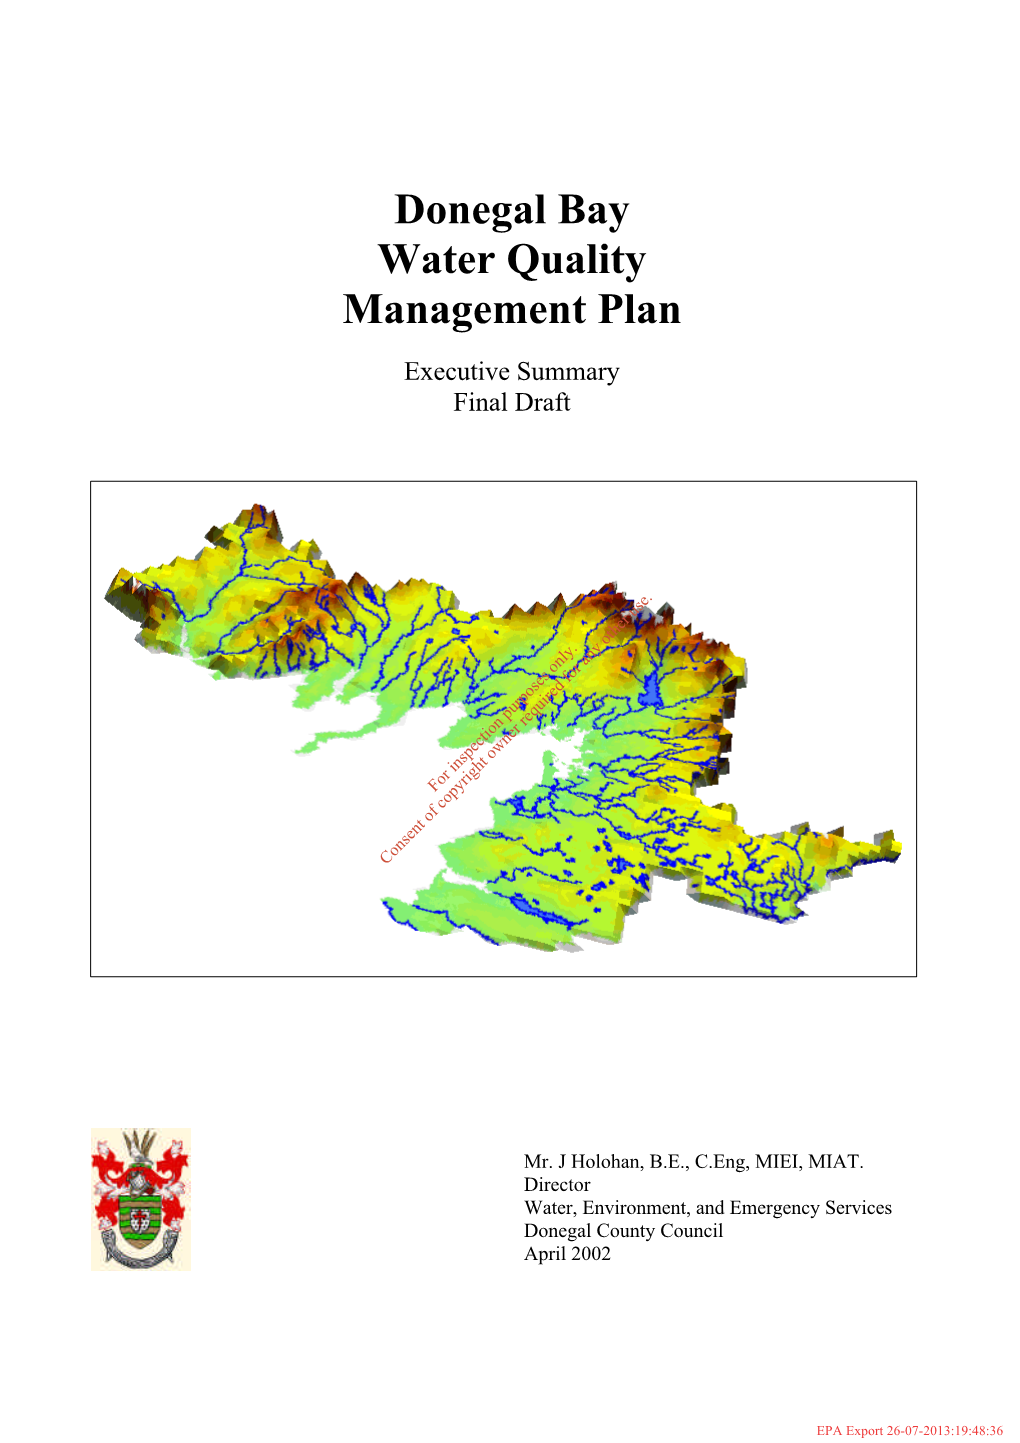 Donegal Bay Water Quality Management Plan